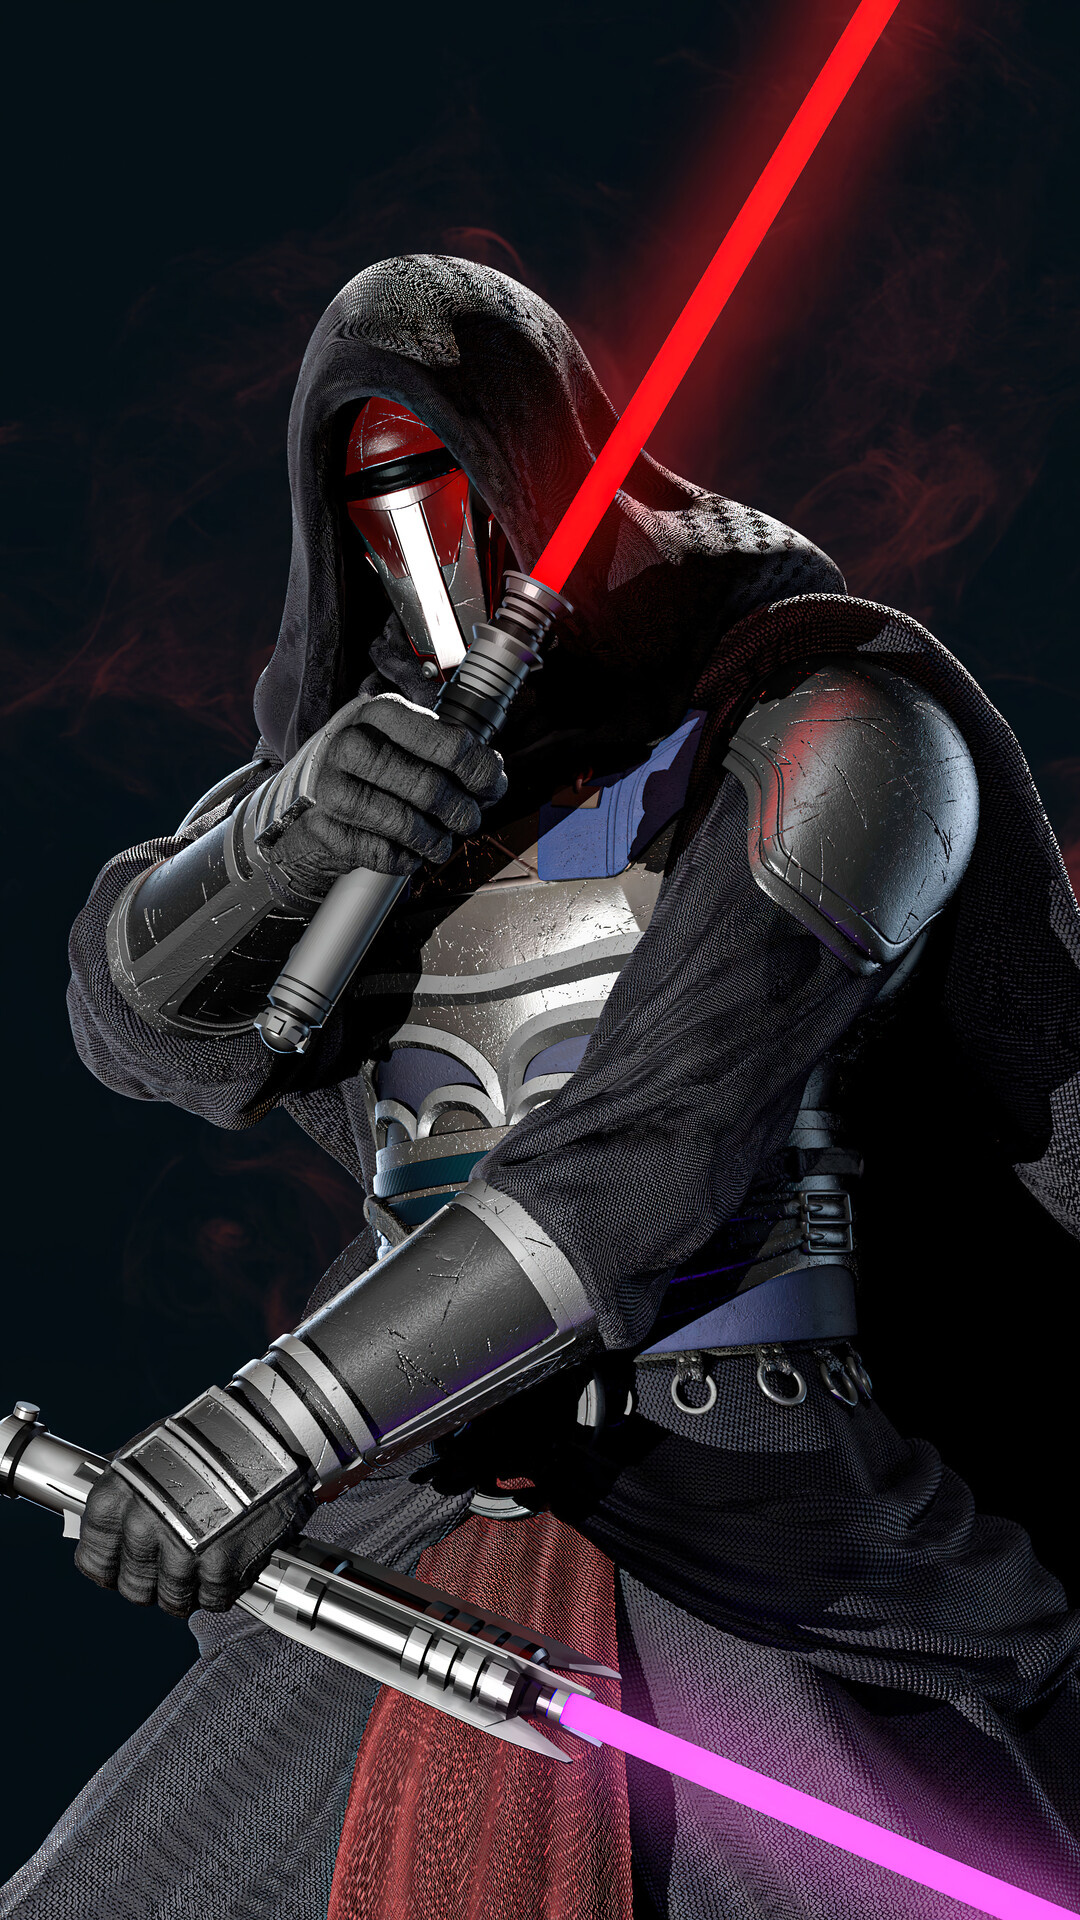 Darth Revan: Was given a new identity as a Republic soldier by the Jedi Council. 1080x1920 Full HD Wallpaper.